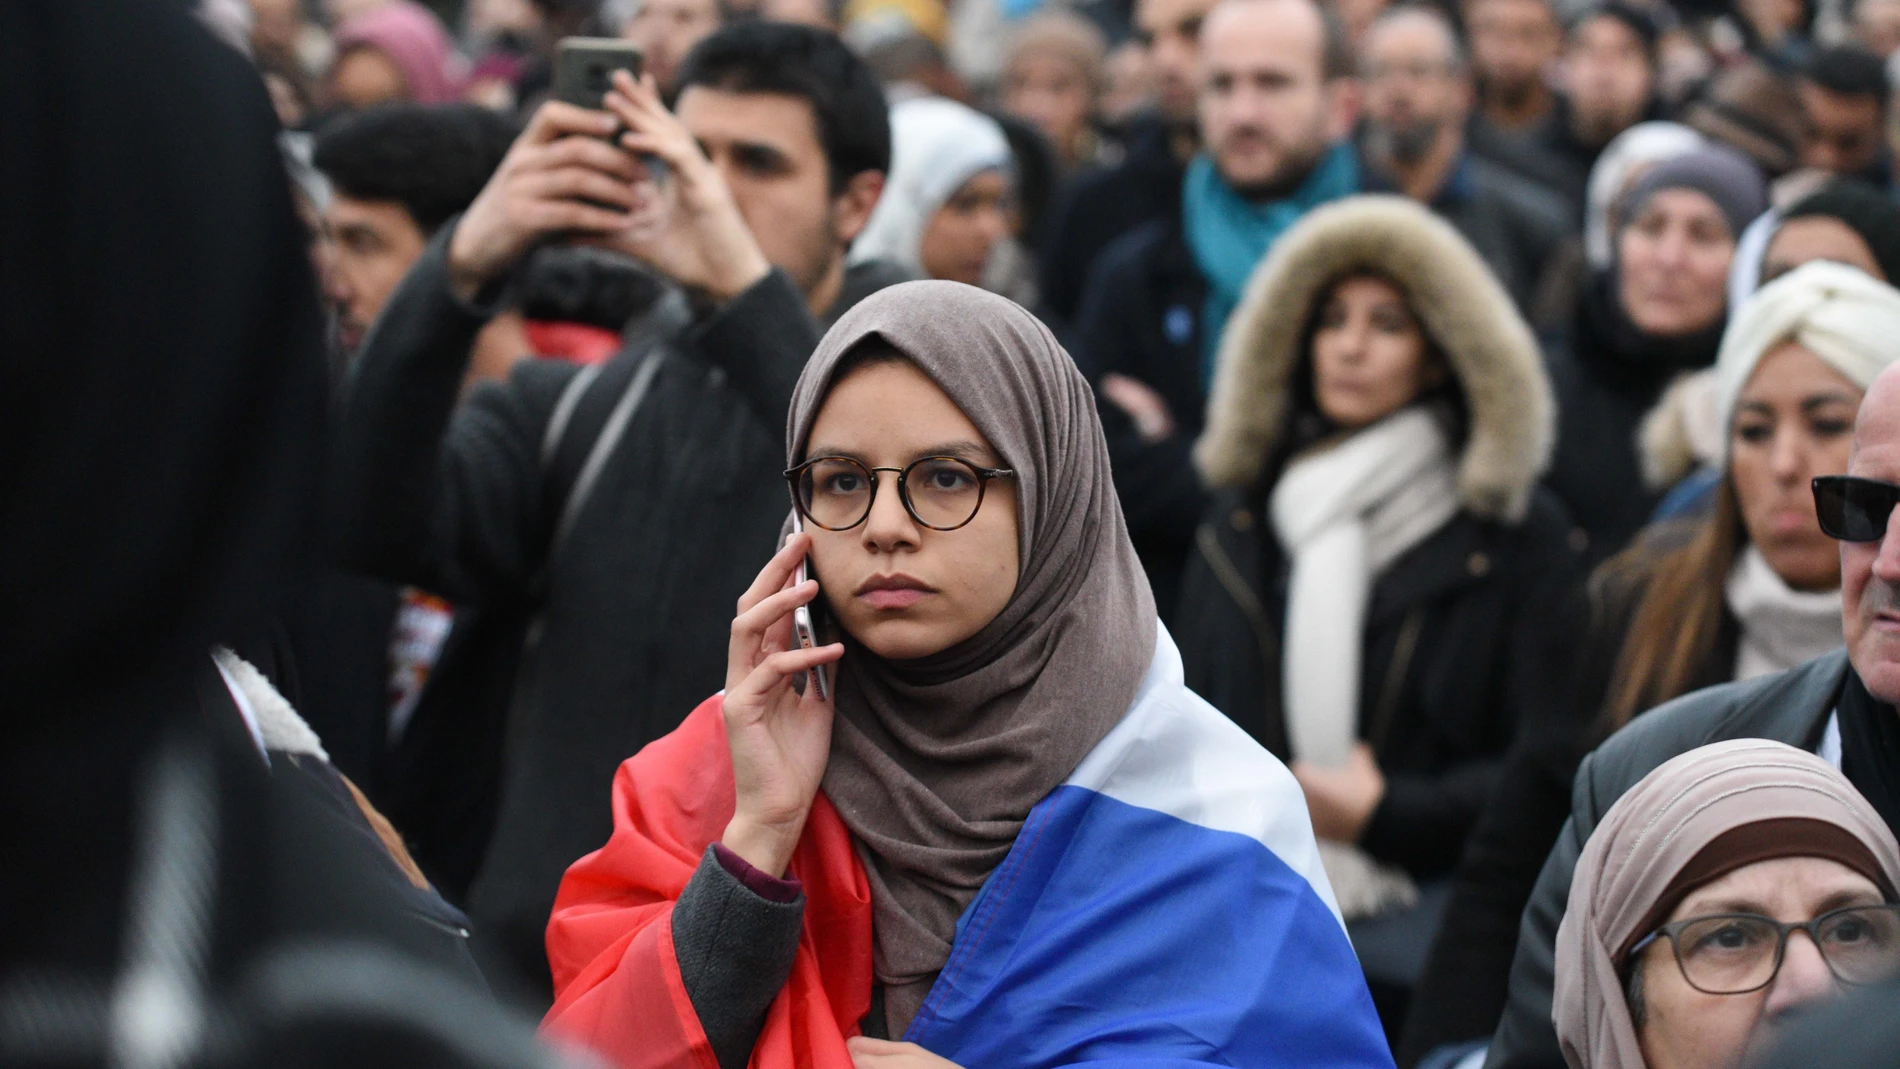 French Muslims protest against Islamophobia